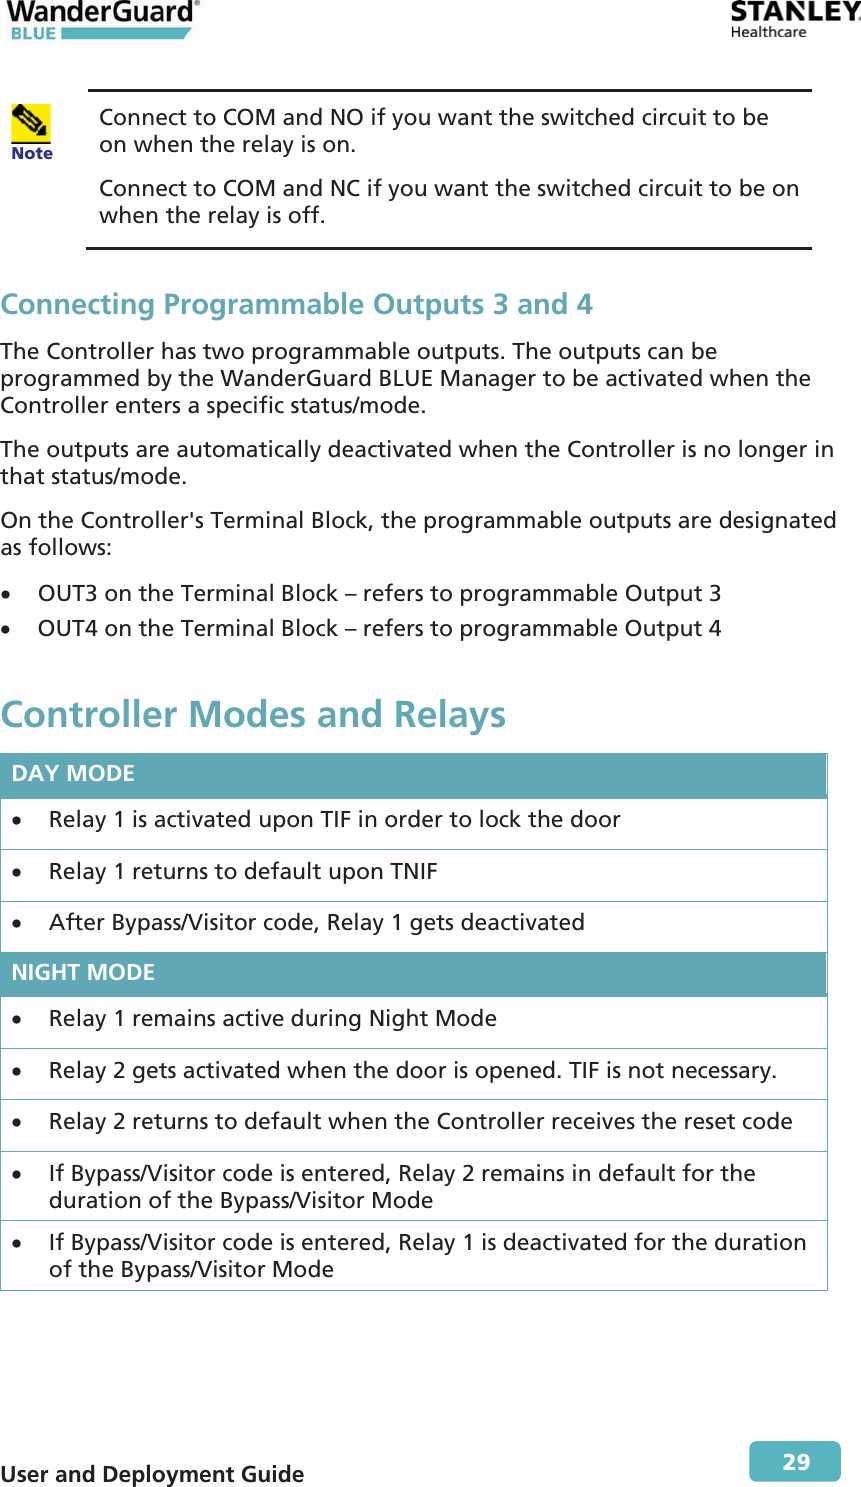  User and Deployment Guide        29  Note Connect to COM and NO if you want the switched circuit to be on when the relay is on.  Connect to COM and NC if you want the switched circuit to be on when the relay is off. Connecting Programmable Outputs 3 and 4 The Controller has two programmable outputs. The outputs can be programmed by the WanderGuard BLUE Manager to be activated when the Controller enters a specific status/mode. The outputs are automatically deactivated when the Controller is no longer in that status/mode. On the Controller&apos;s Terminal Block, the programmable outputs are designated as follows: x OUT3 on the Terminal Block – refers to programmable Output 3 x OUT4 on the Terminal Block – refers to programmable Output 4 Controller Modes and Relays DAY MODE x Relay 1 is activated upon TIF in order to lock the door  x Relay 1 returns to default upon TNIF x After Bypass/Visitor code, Relay 1 gets deactivated NIGHT MODE x Relay 1 remains active during Night Mode x Relay 2 gets activated when the door is opened. TIF is not necessary. x Relay 2 returns to default when the Controller receives the reset code x If Bypass/Visitor code is entered, Relay 2 remains in default for the duration of the Bypass/Visitor Mode x If Bypass/Visitor code is entered, Relay 1 is deactivated for the duration of the Bypass/Visitor Mode 